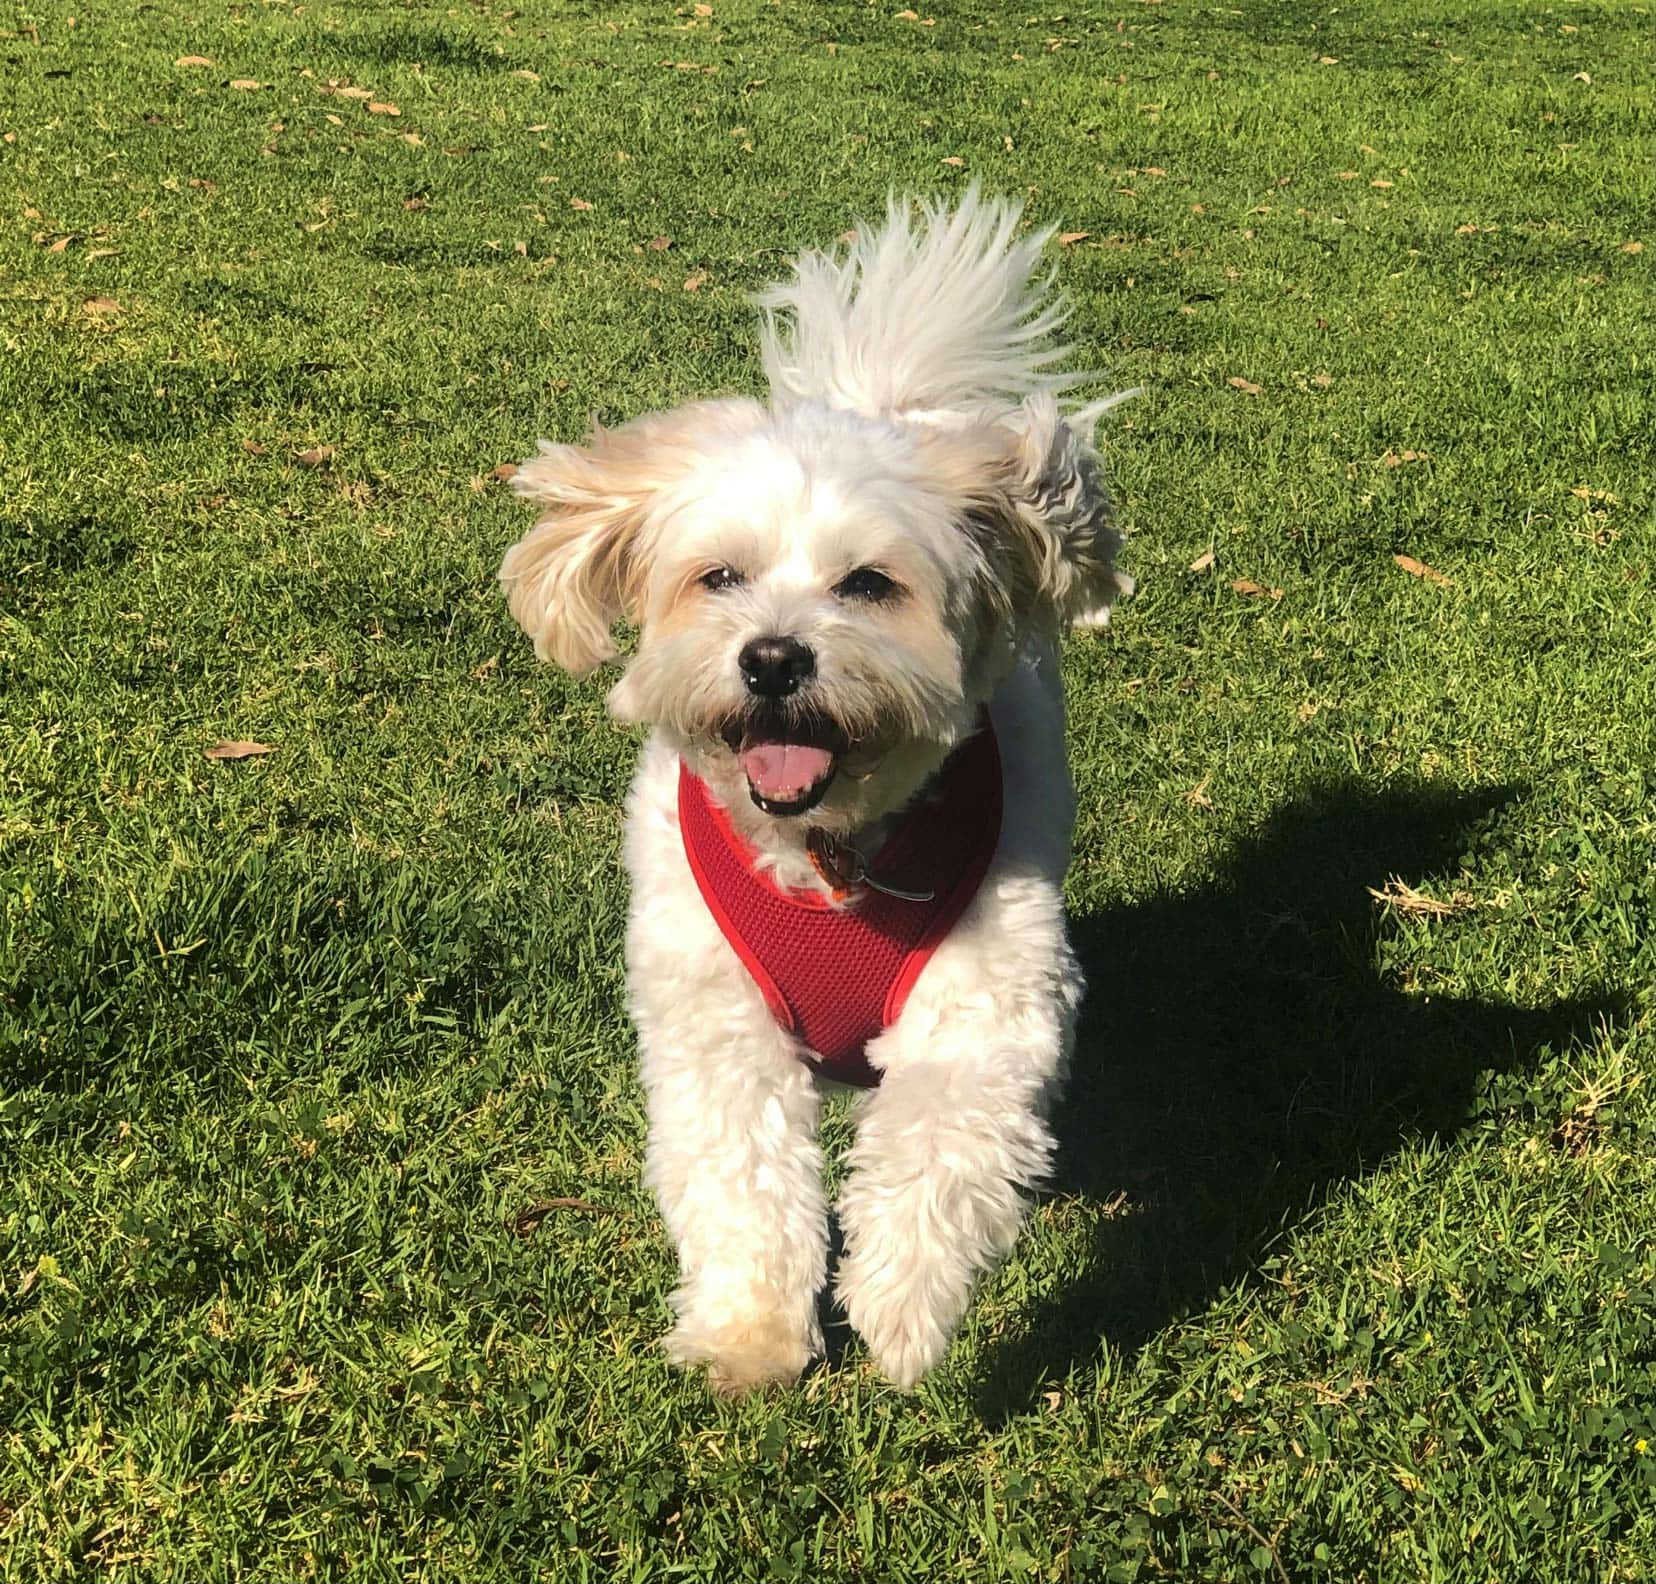 Small white dog with a red collar running on grass